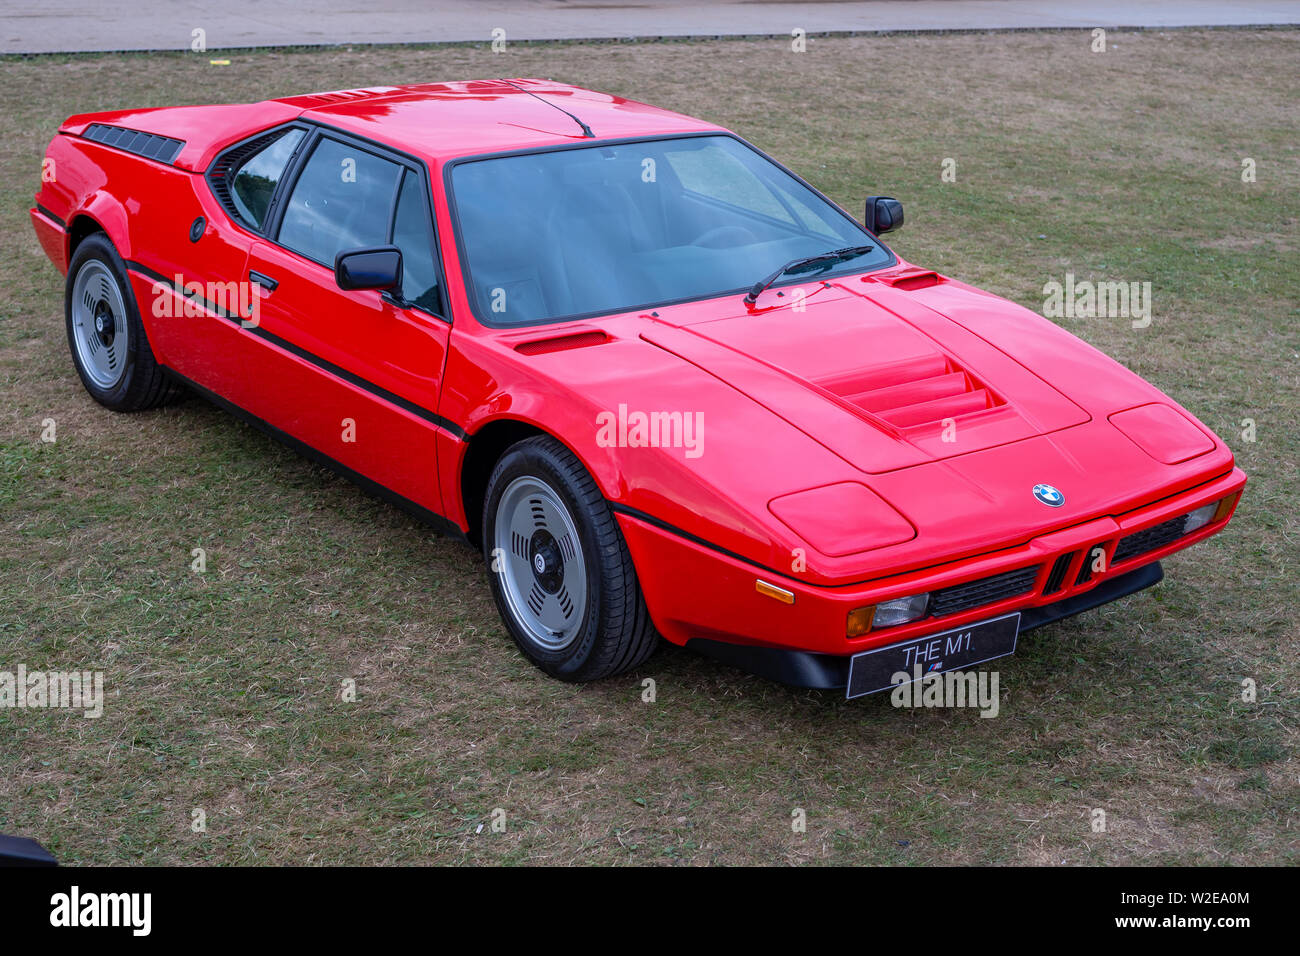 Red BMW The M1 Sports Car at Goodwood Festival of Speed 2019 Stock Photo